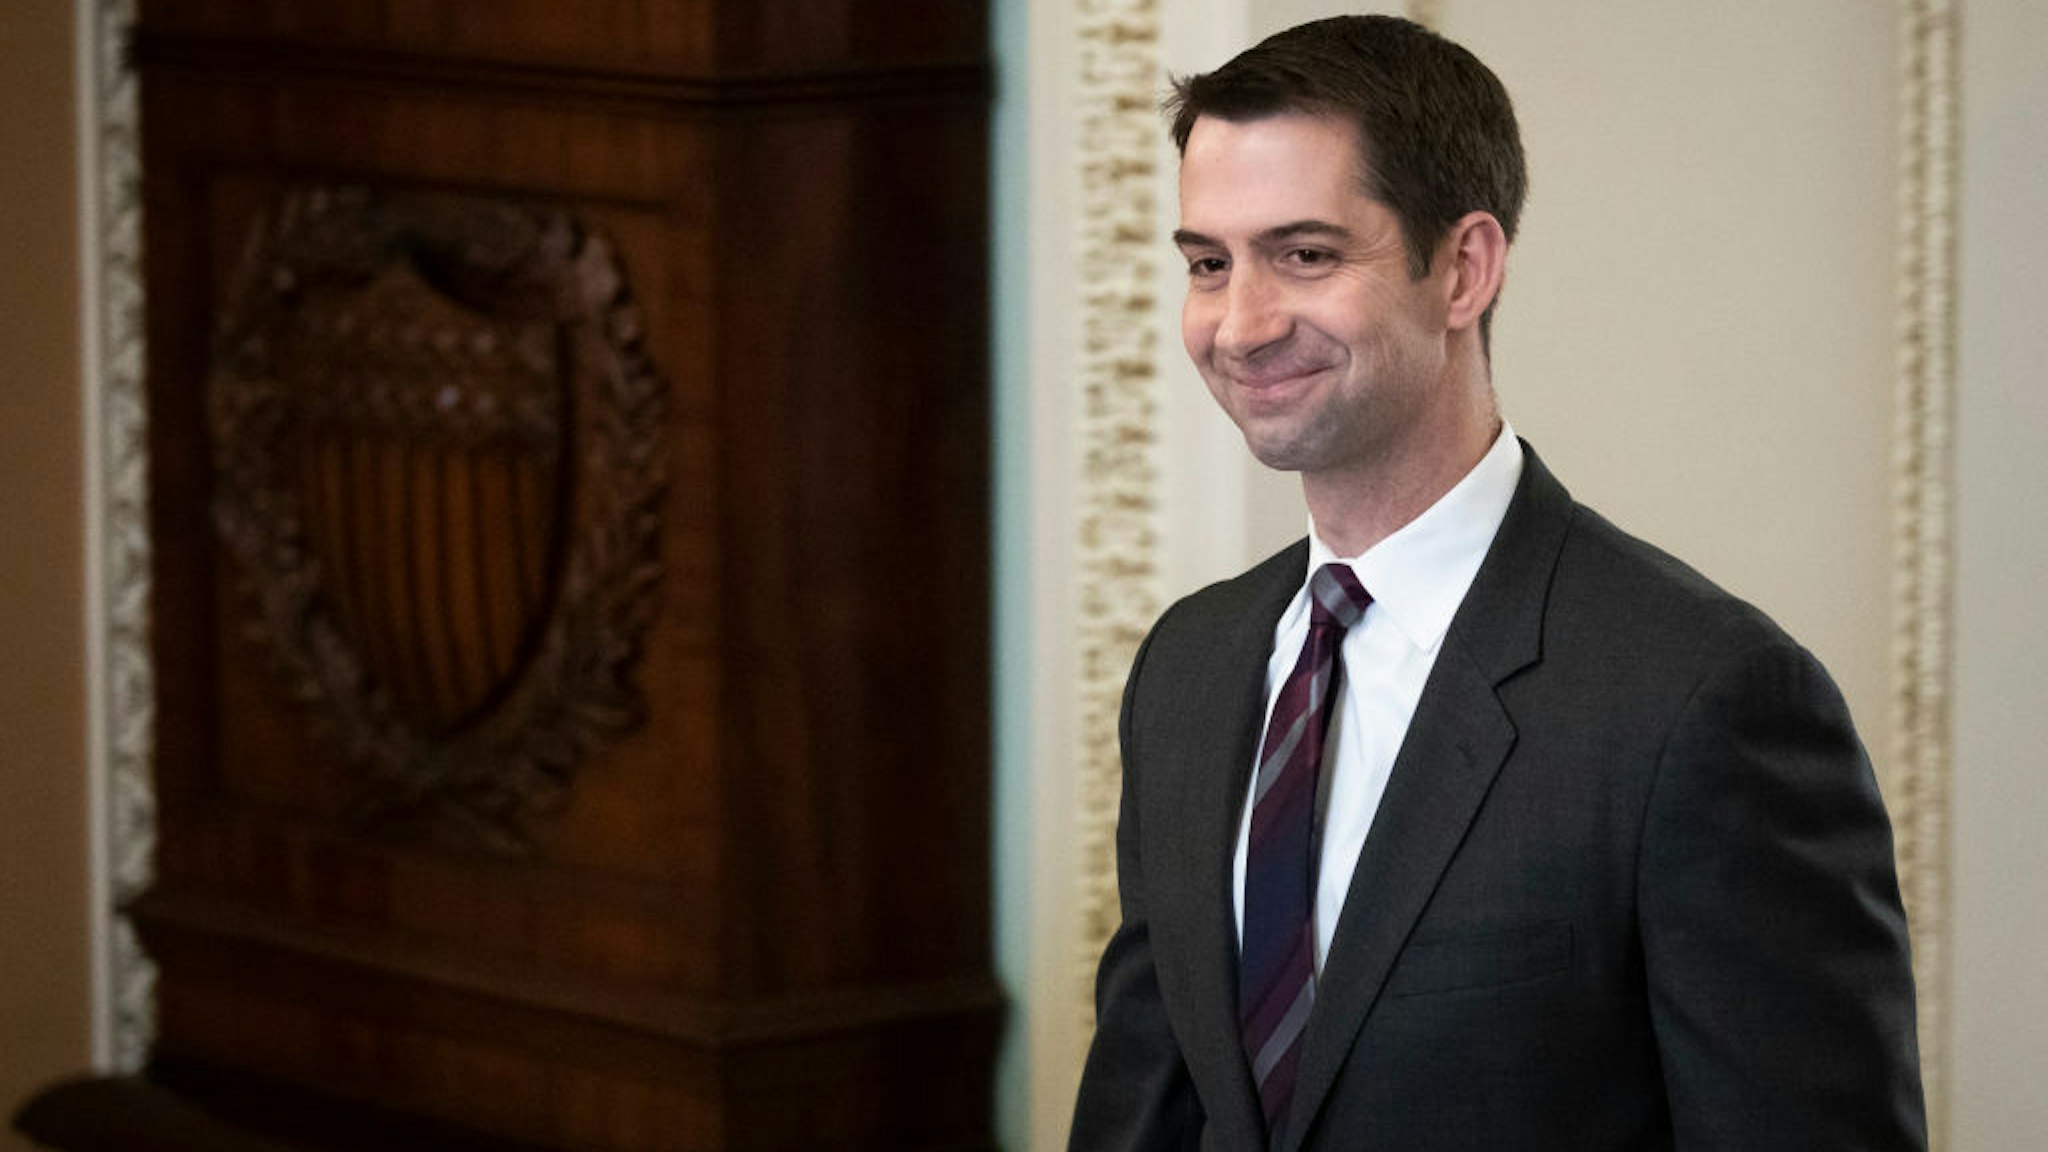 Sen. Tom Cotton (R-AR) walks to the Senate floor for the start of impeachment trial proceedings at the U.S. Capitol on January 21, 2020 in Washington, DC.